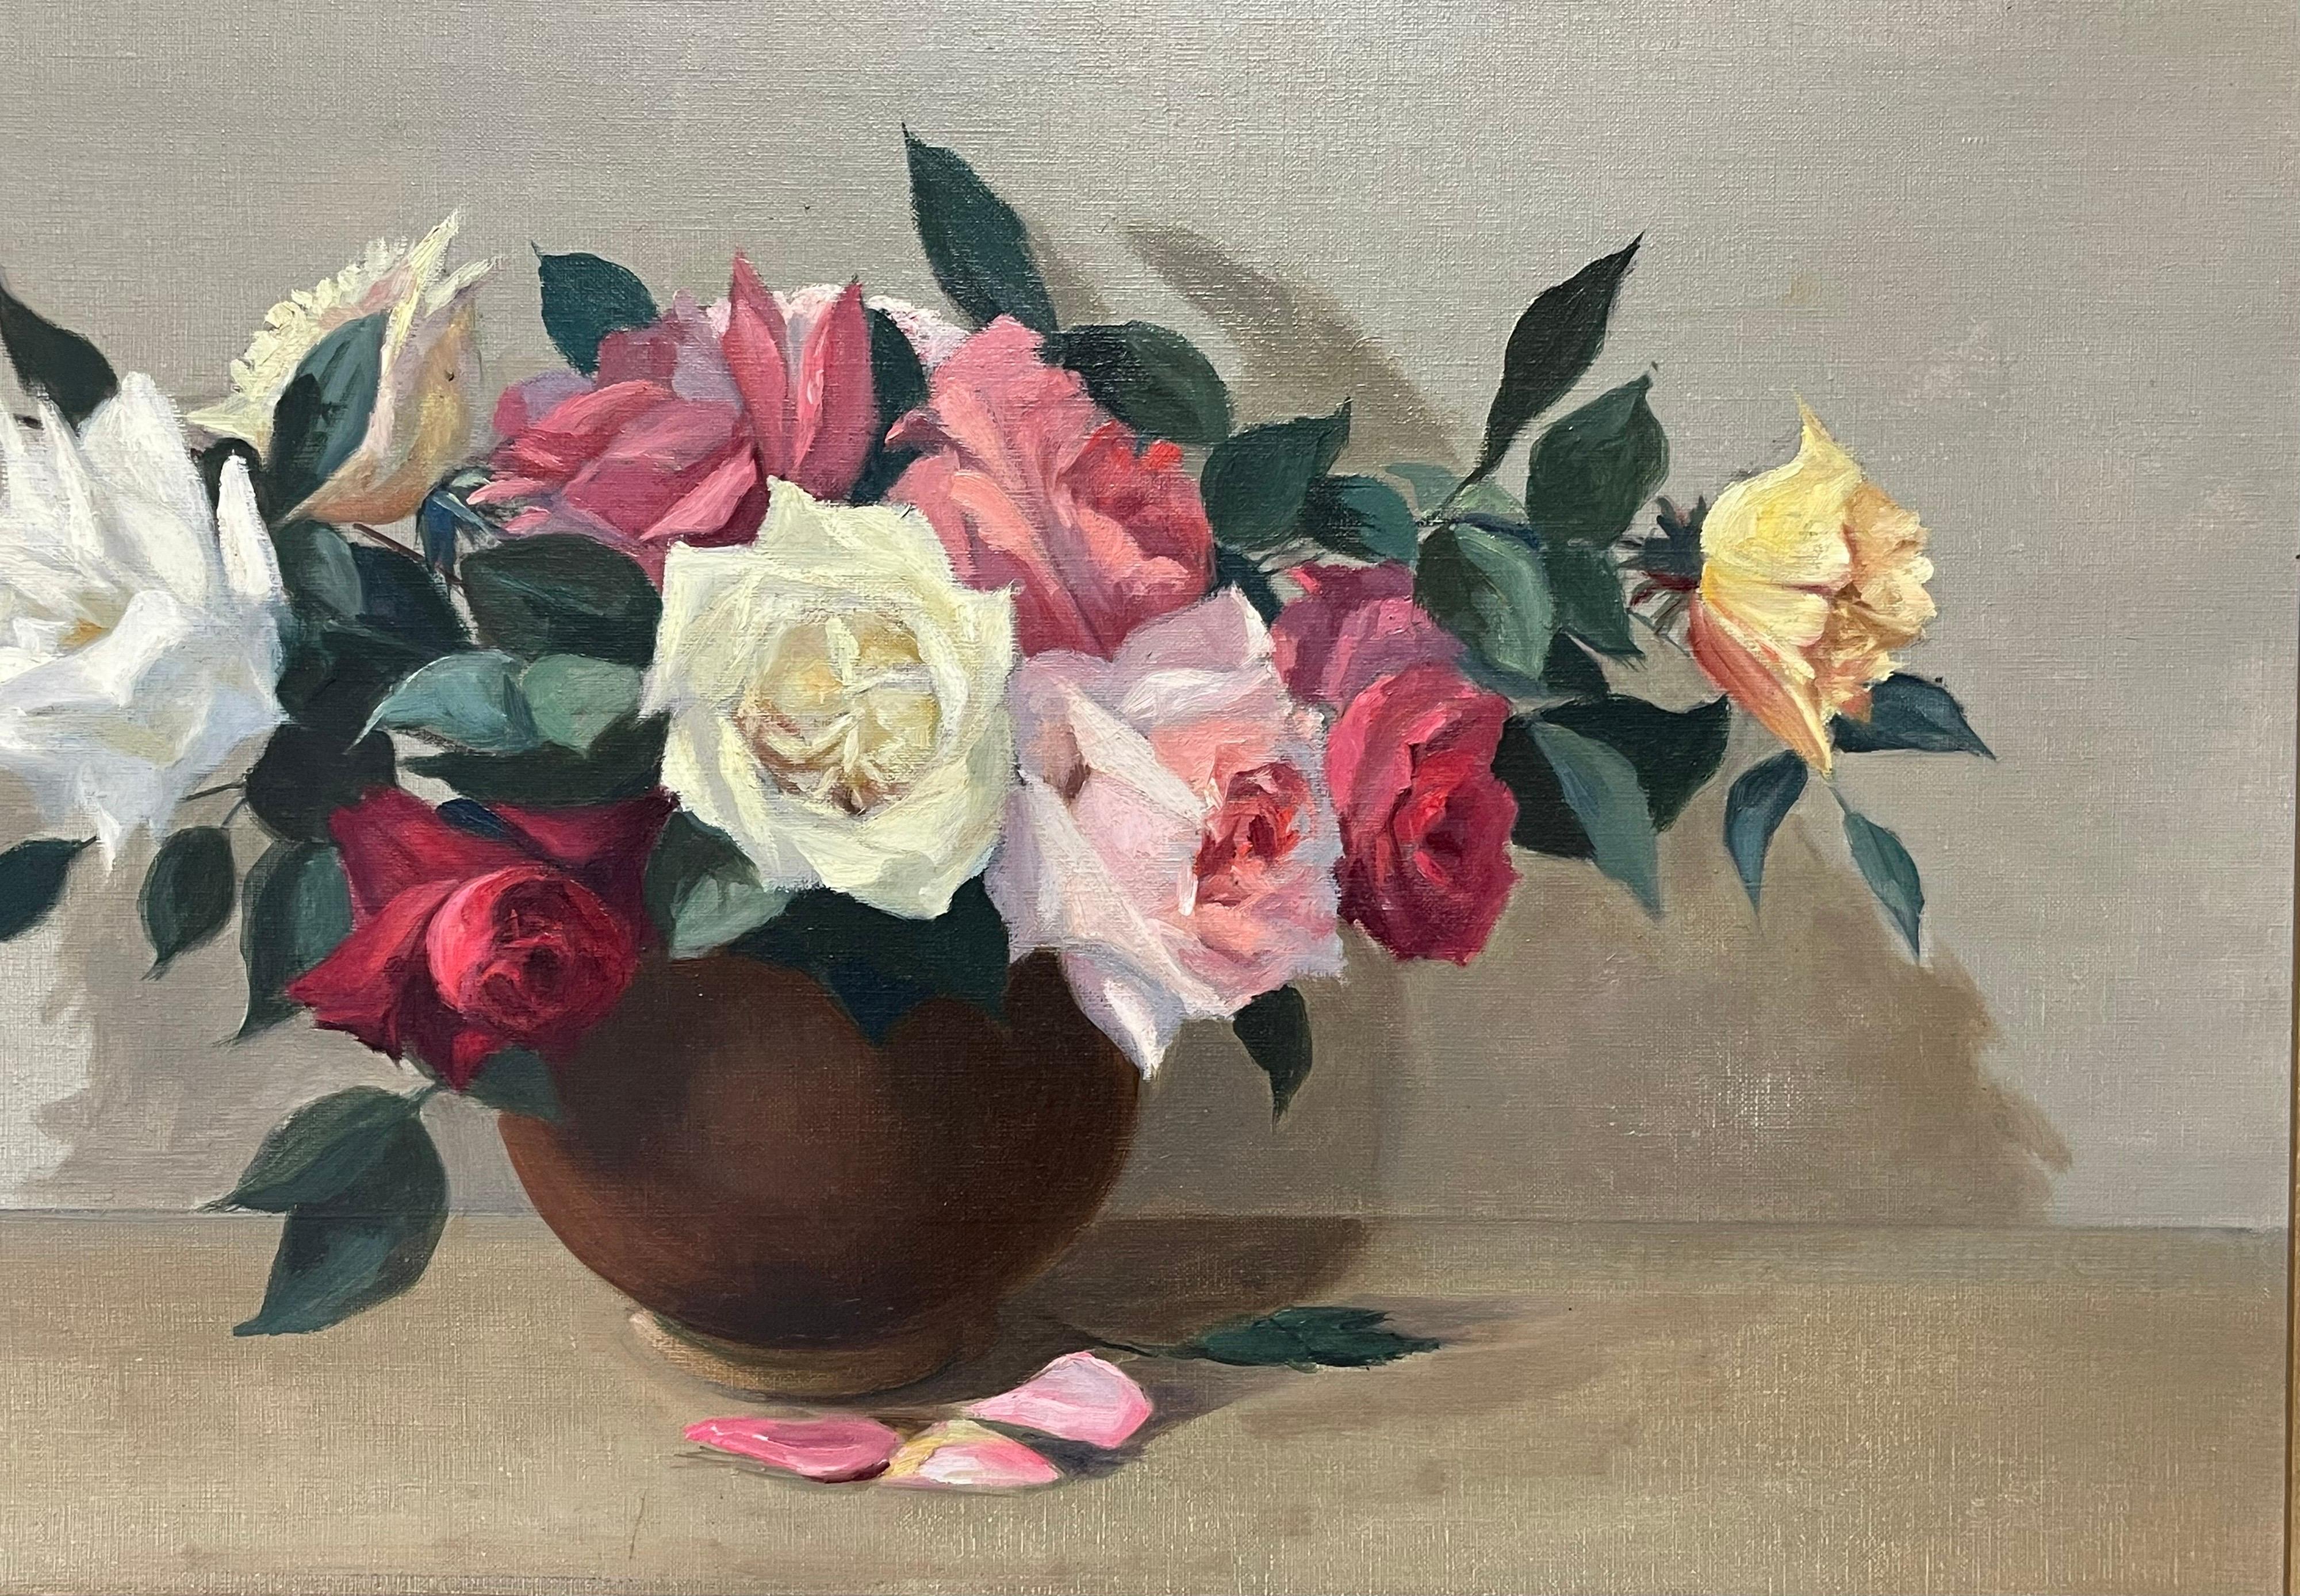 Large 20th Century French Impressionist Signed Oil - Beautiful Roses in Bowl - Brown Interior Painting by G. Pernet